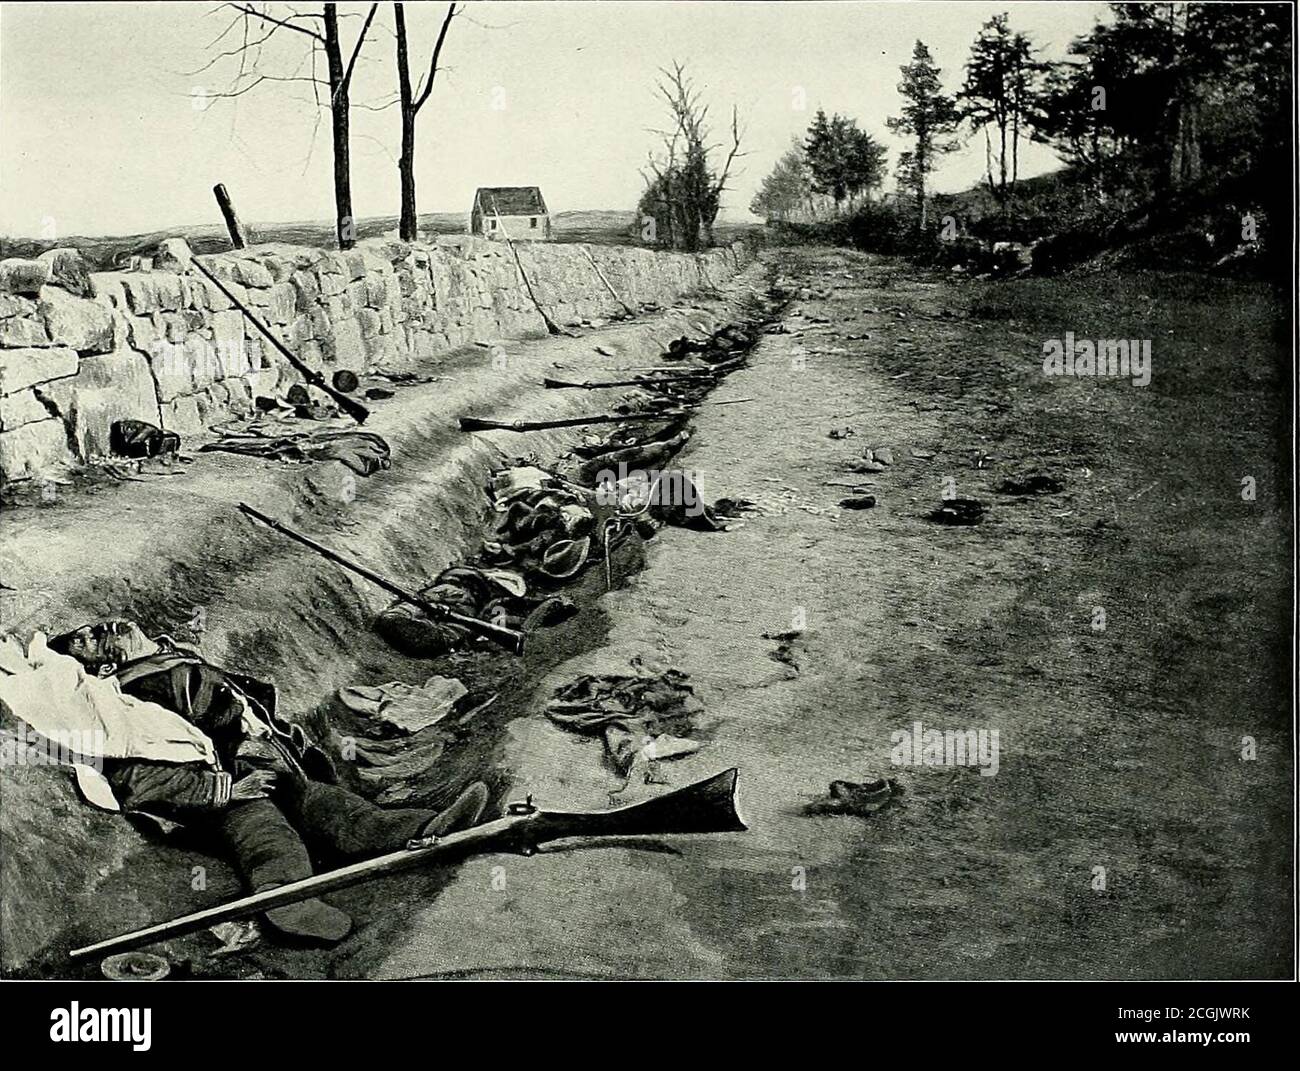 . Original photographs taken on the battlefields during the Civil War of the United States . PHOTOCRAPH TAKEN ON THE RAPPAHANNOCK RIVER AFTER INSTRUCTION OF BRIDGE TO FREDERICKSBURG IN l862. PHOTOGRAPH TAKEN ALONG THE SUNKEN ROAD AT FREDERICKSBURG AFTER THE BATTLE IN 1863 CONFRONTED by sheets offlame, the Union Army madeits attack on Fredericksburgon the morning of the thir-teenth of December, in 1862. TheConfederates occupied the Heightswith a line five and a half miles longand fortified with earthworks andartillery. The Federals movedthrough the town under a heavy fireof Confederate batterie Stock Photo